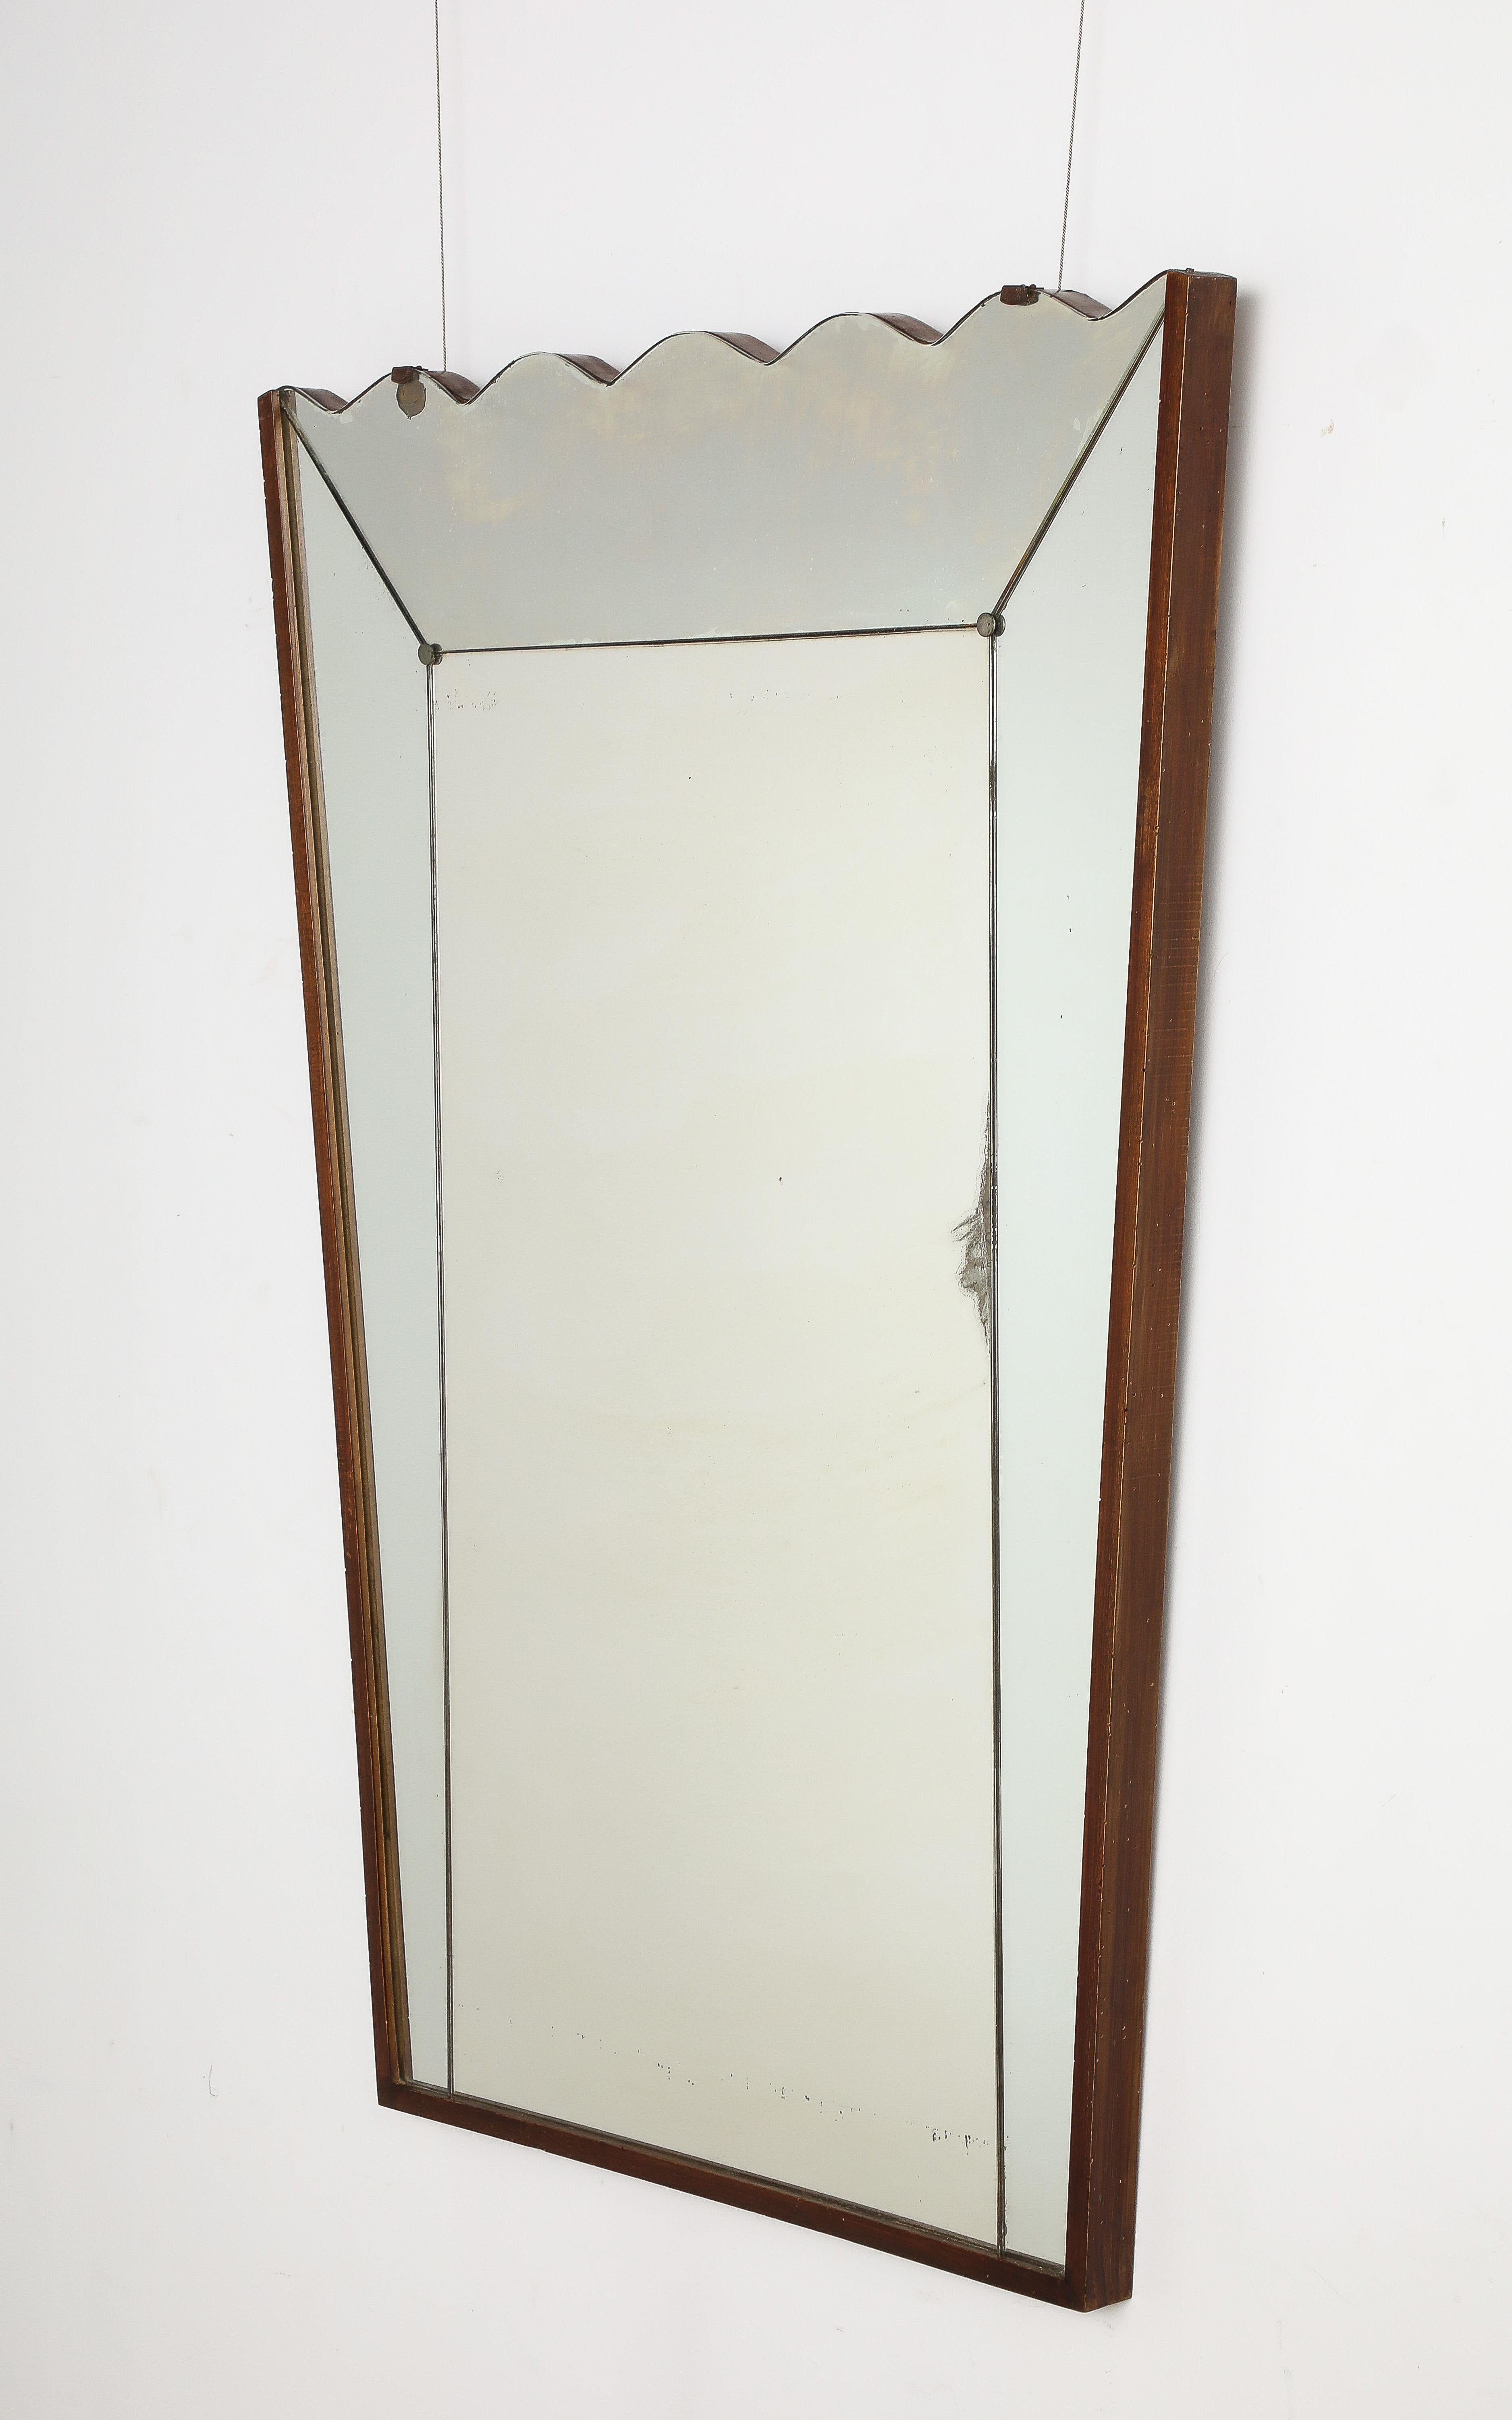 Vittorio Dassi Wood and Scalloped Wall Mirror, Italy circa late 1940's 

A highly unique and decorative wall mirror features a straight walnut frame on the sides and base which highlights the delicate scalloped pattern at the top which runs the